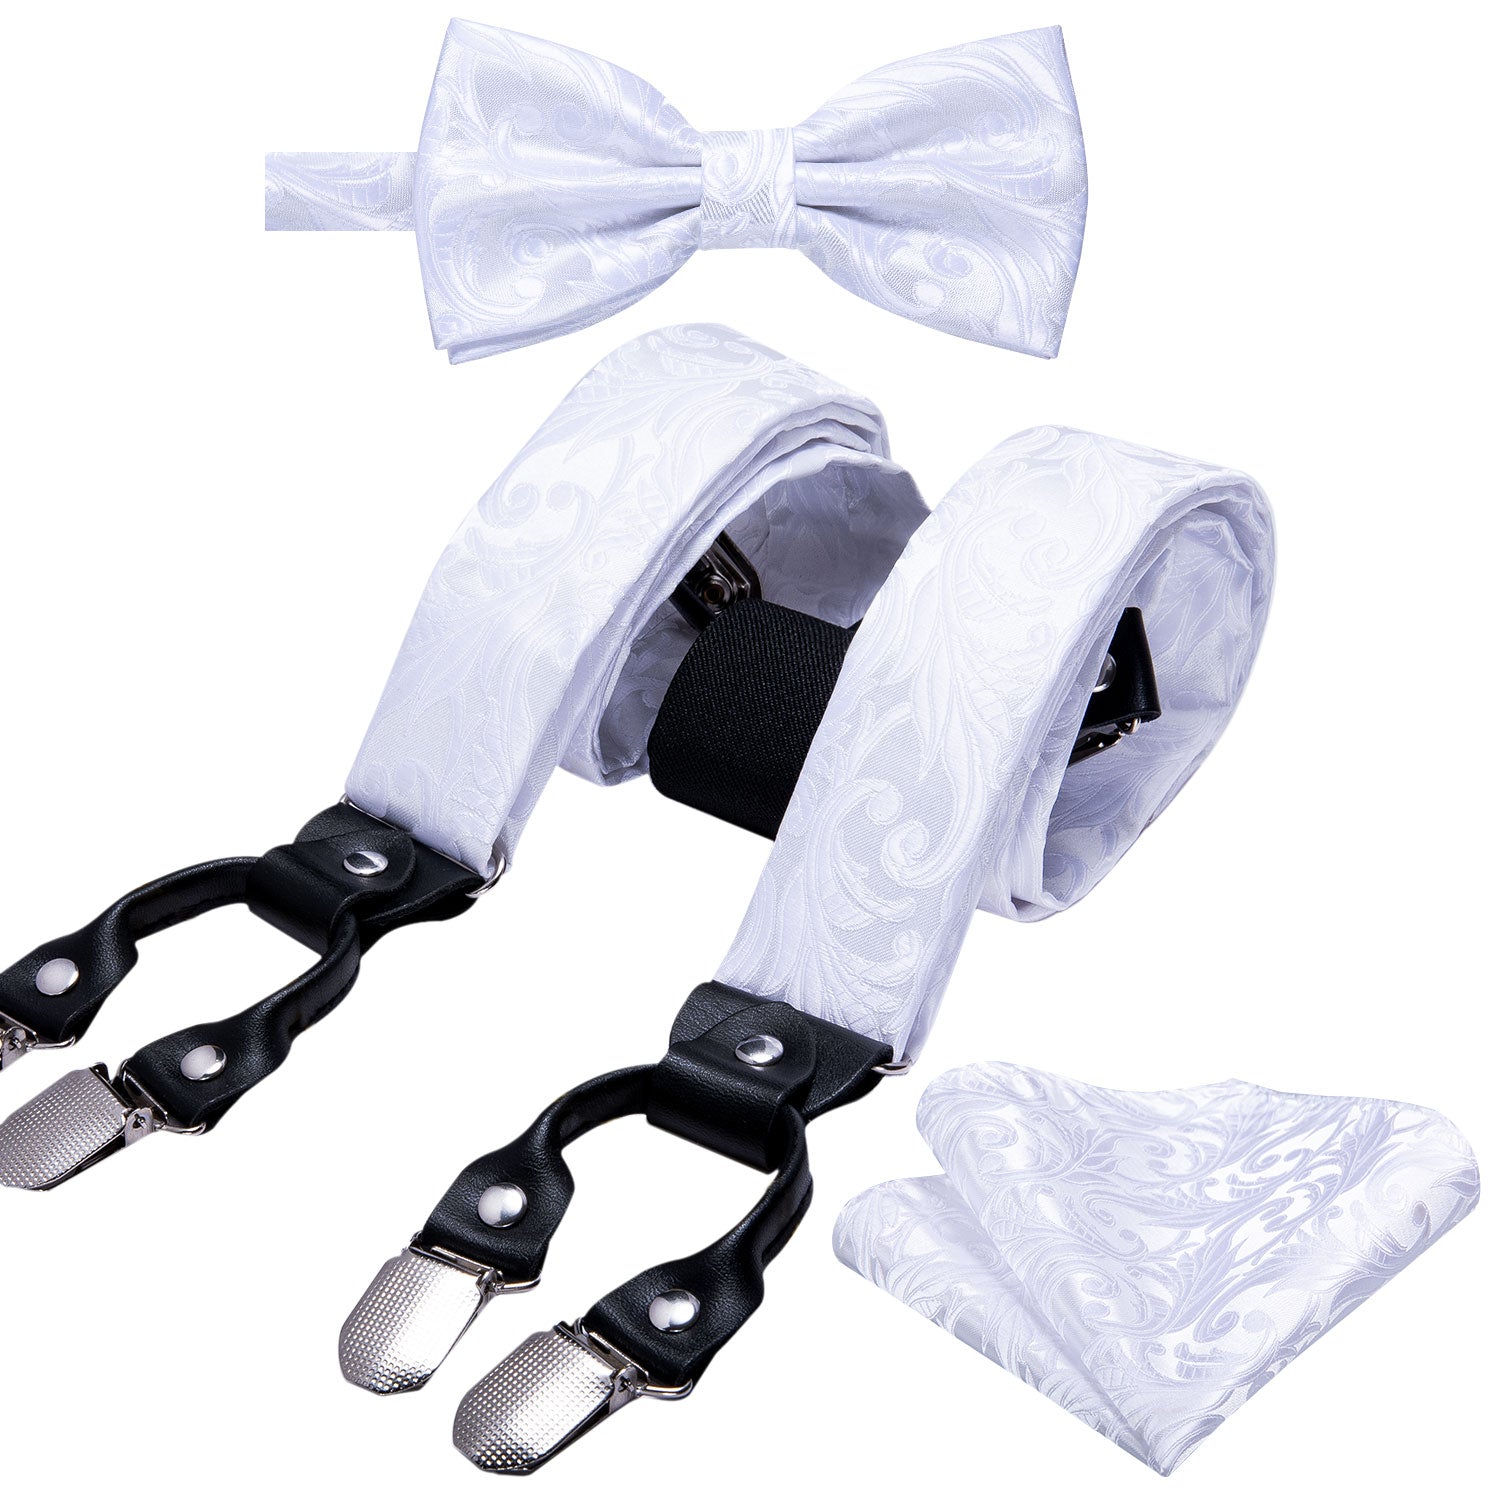 Barry.wang White Tie Floral Y Back Adjustable Suspenders Bow Tie Set